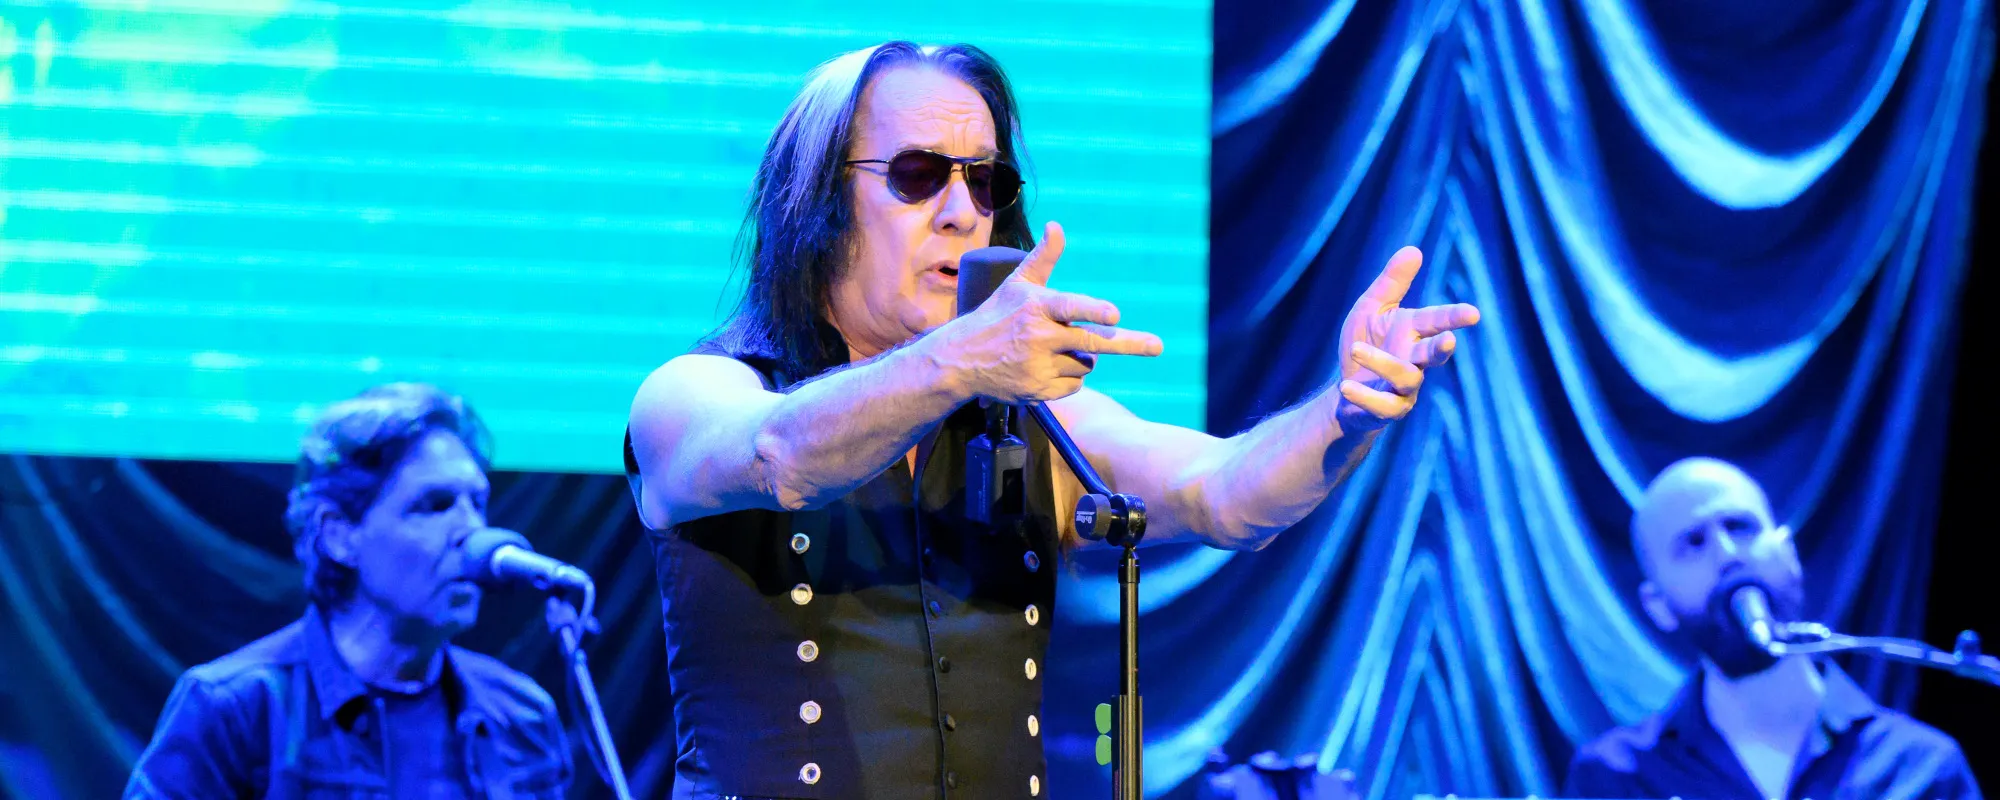 Review: Someone, Not Just Anyone, Revisits the Music of Todd Rundgren